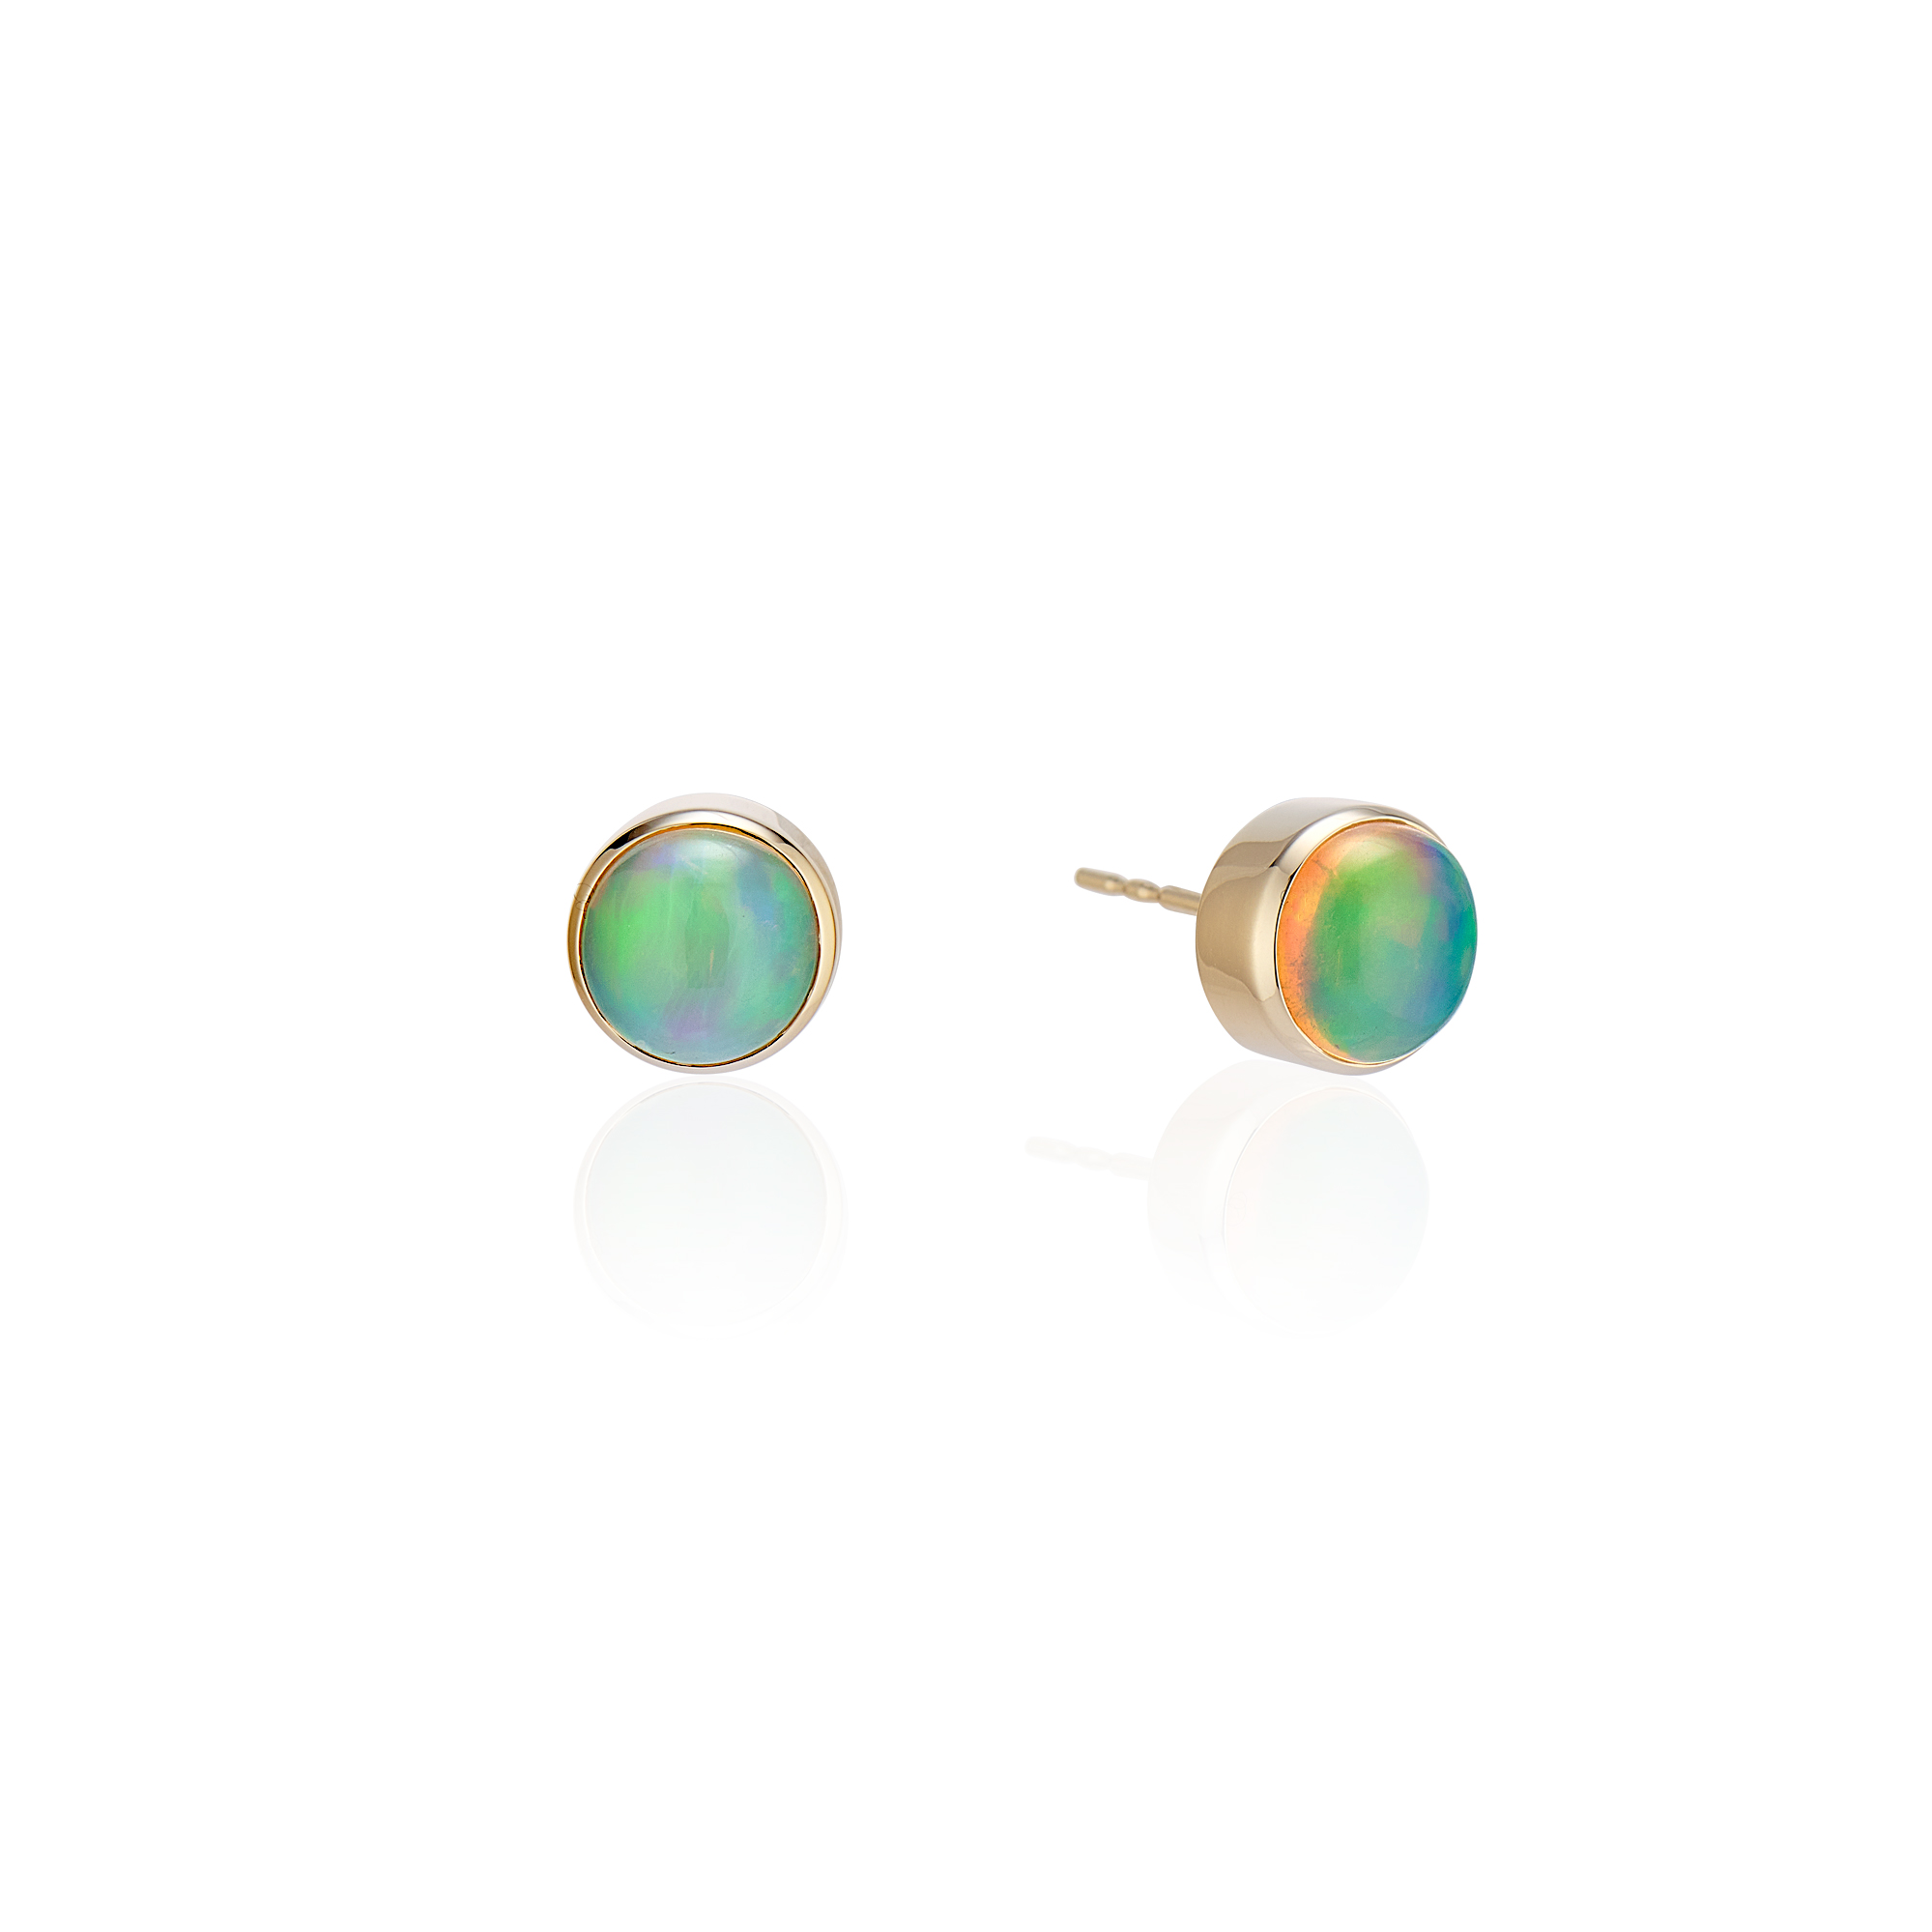 Opal 8mm Round Stud Earrings 14Kt Yellow Gold